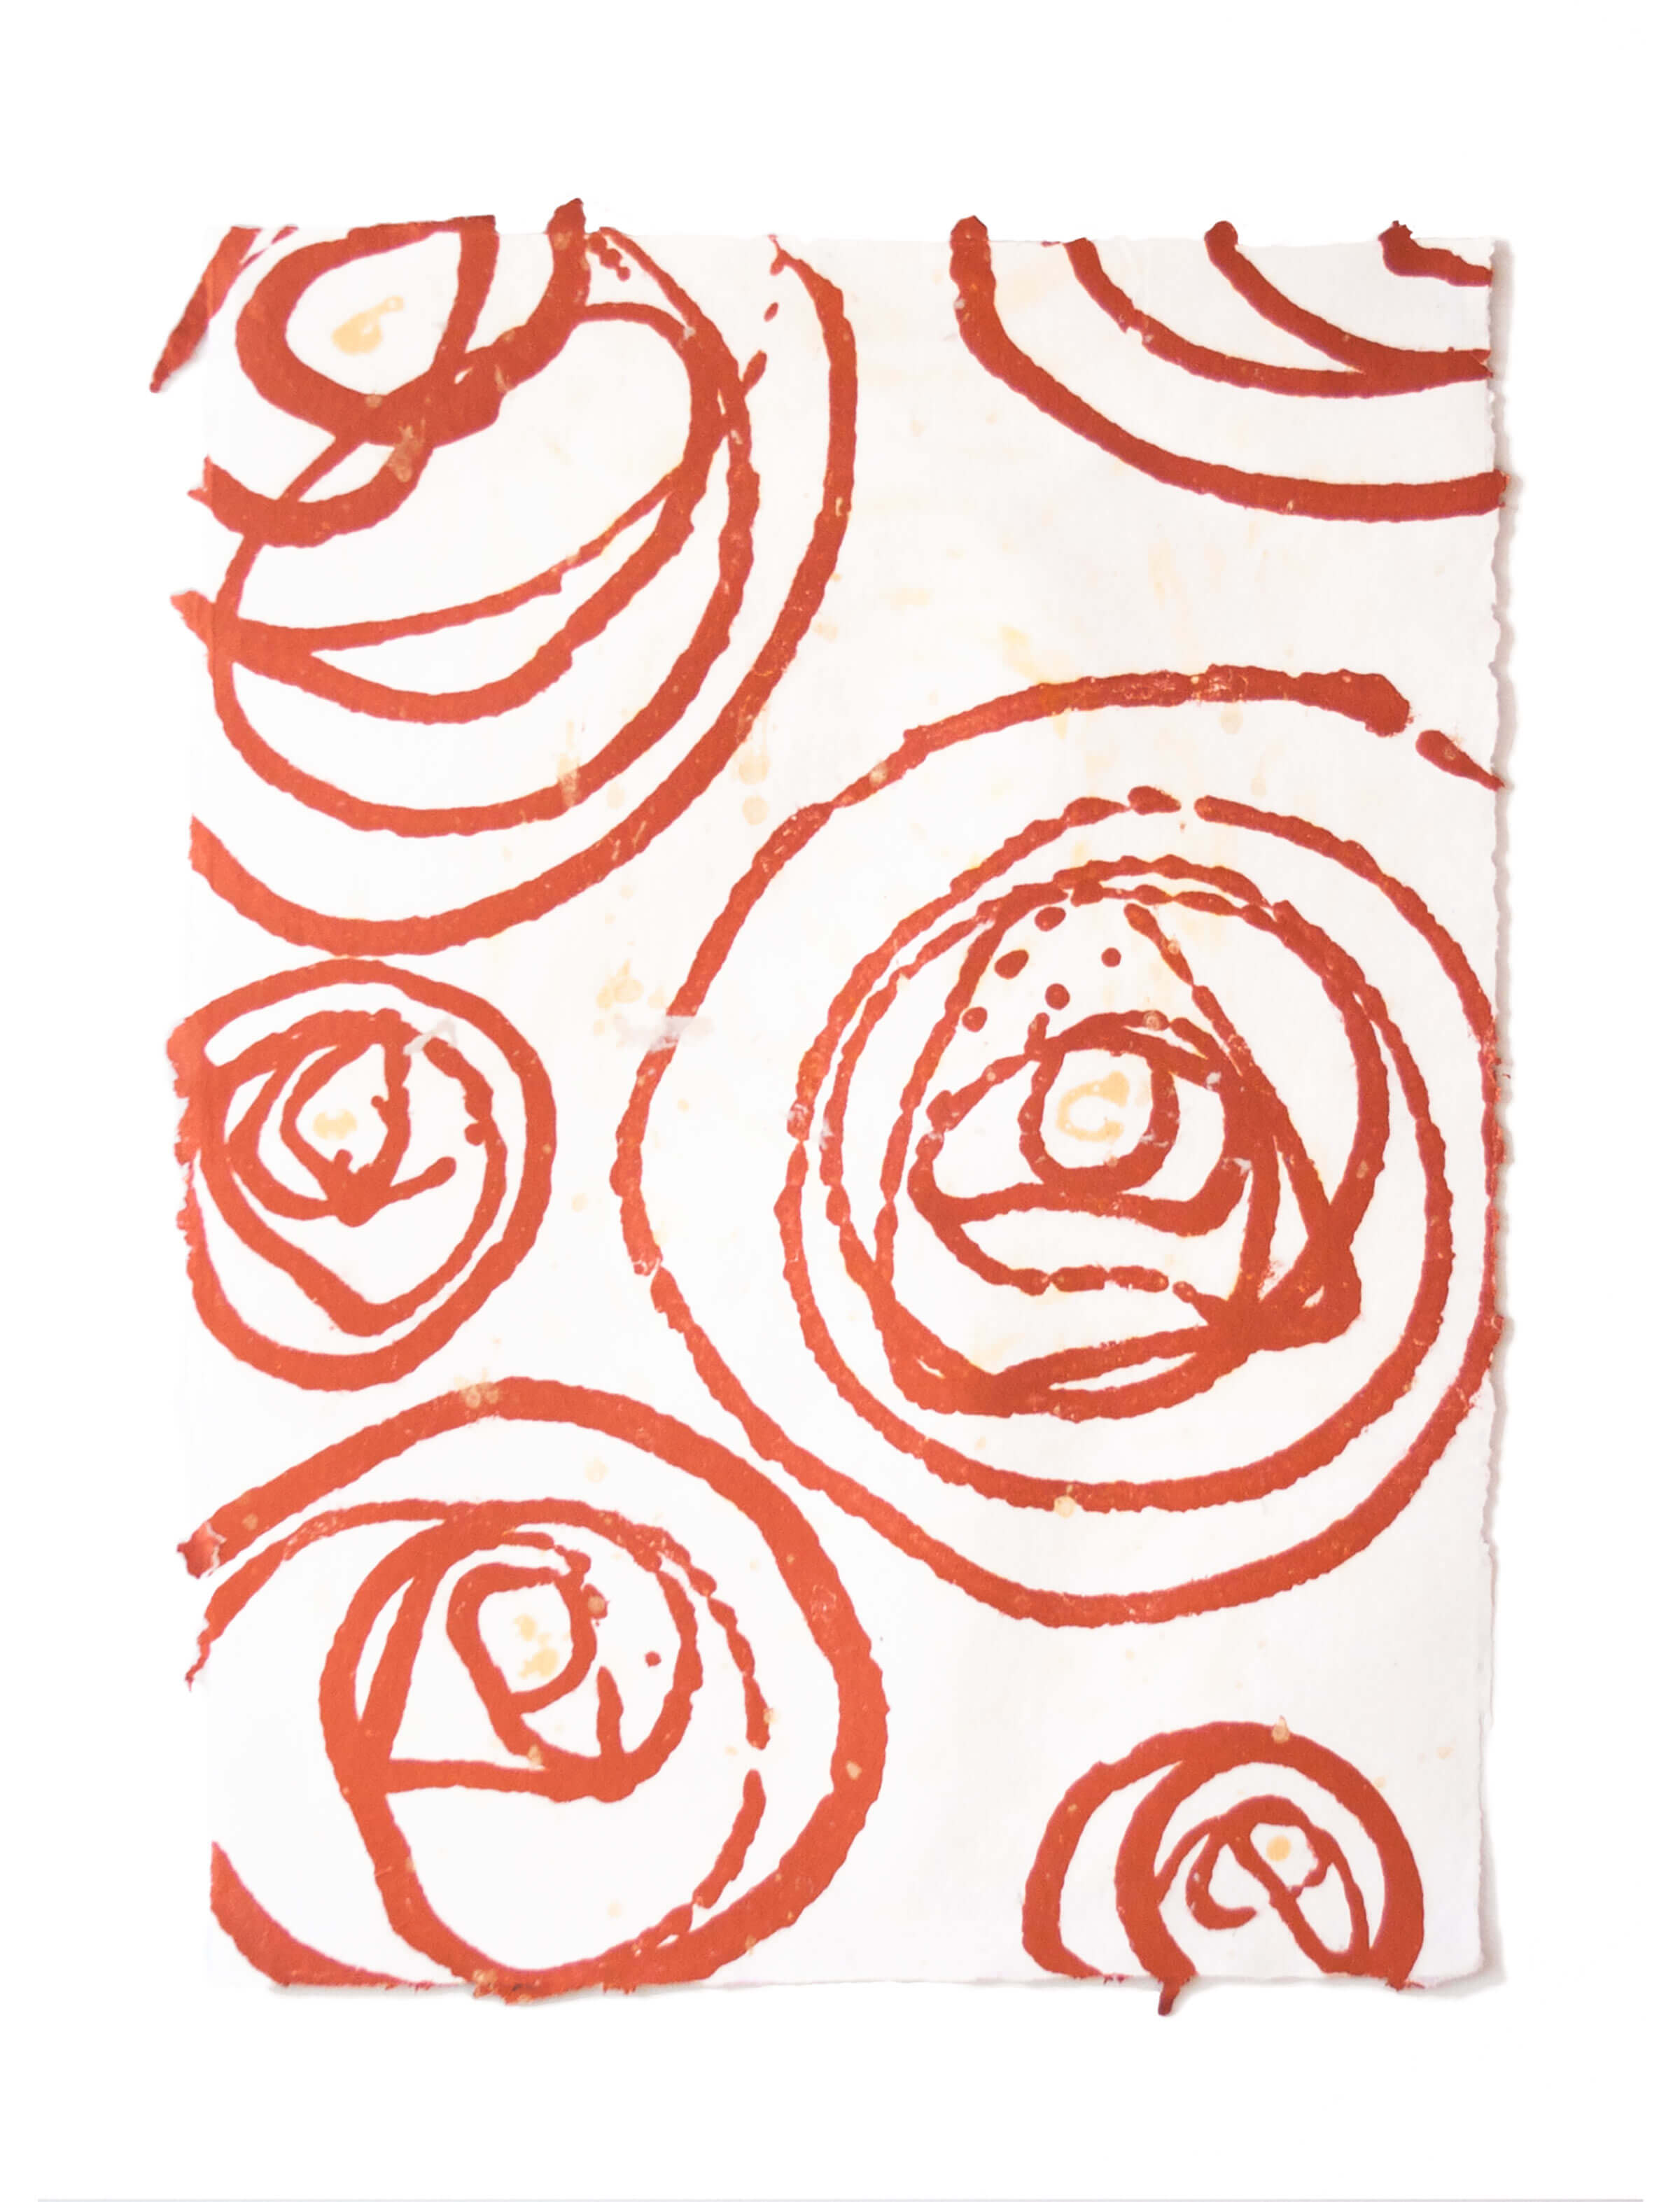 Roses II - Pulp Painting by Emily ! Duong